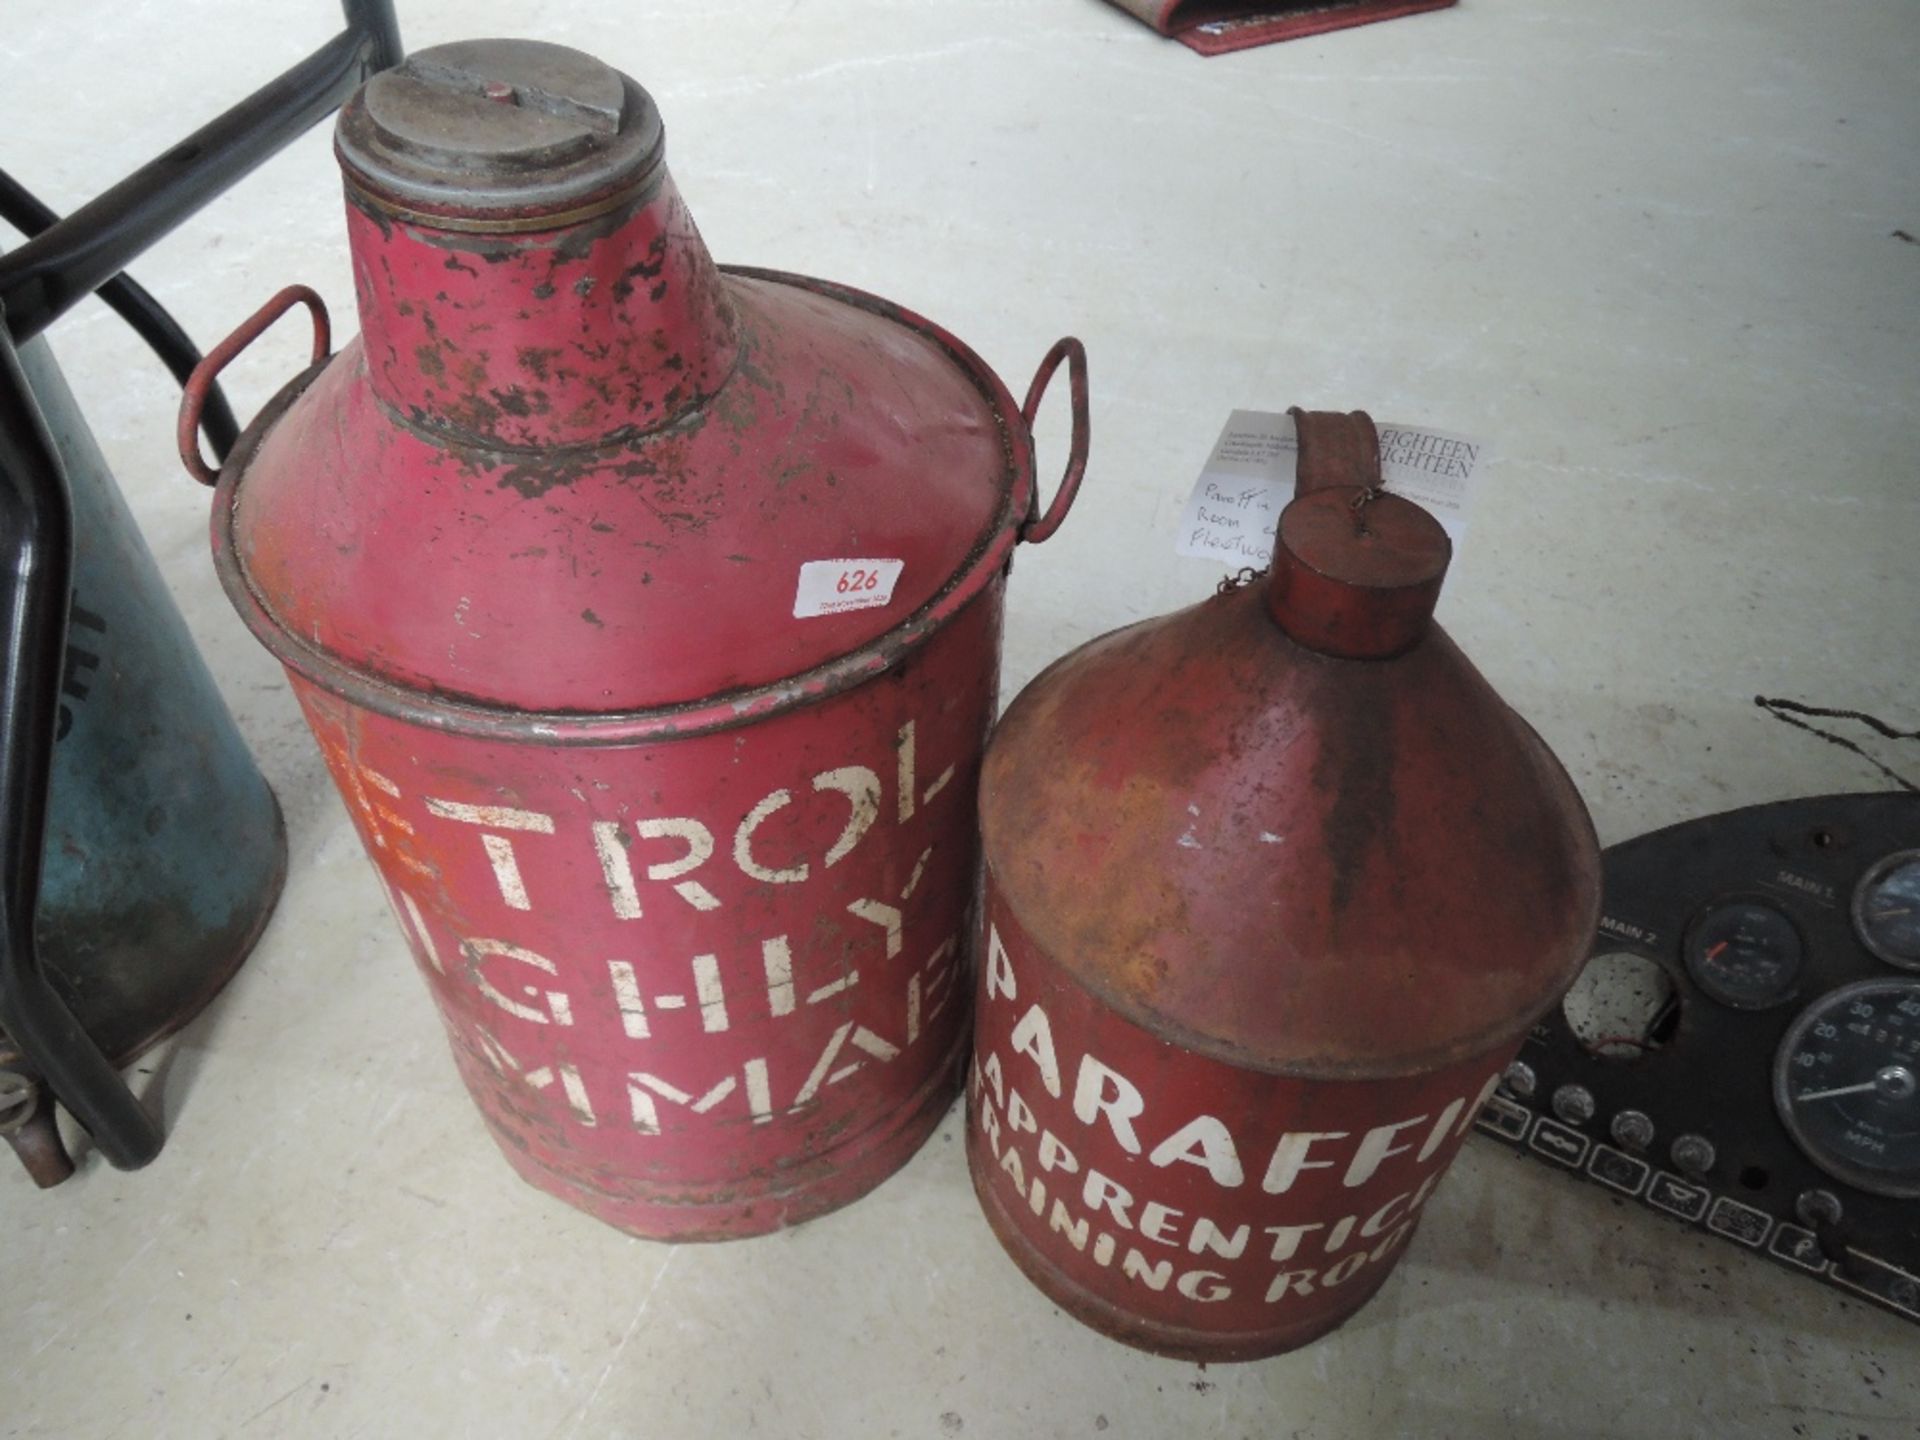 A large petrol can and a unusual Paraffin can reading Apprentice training room, these came from